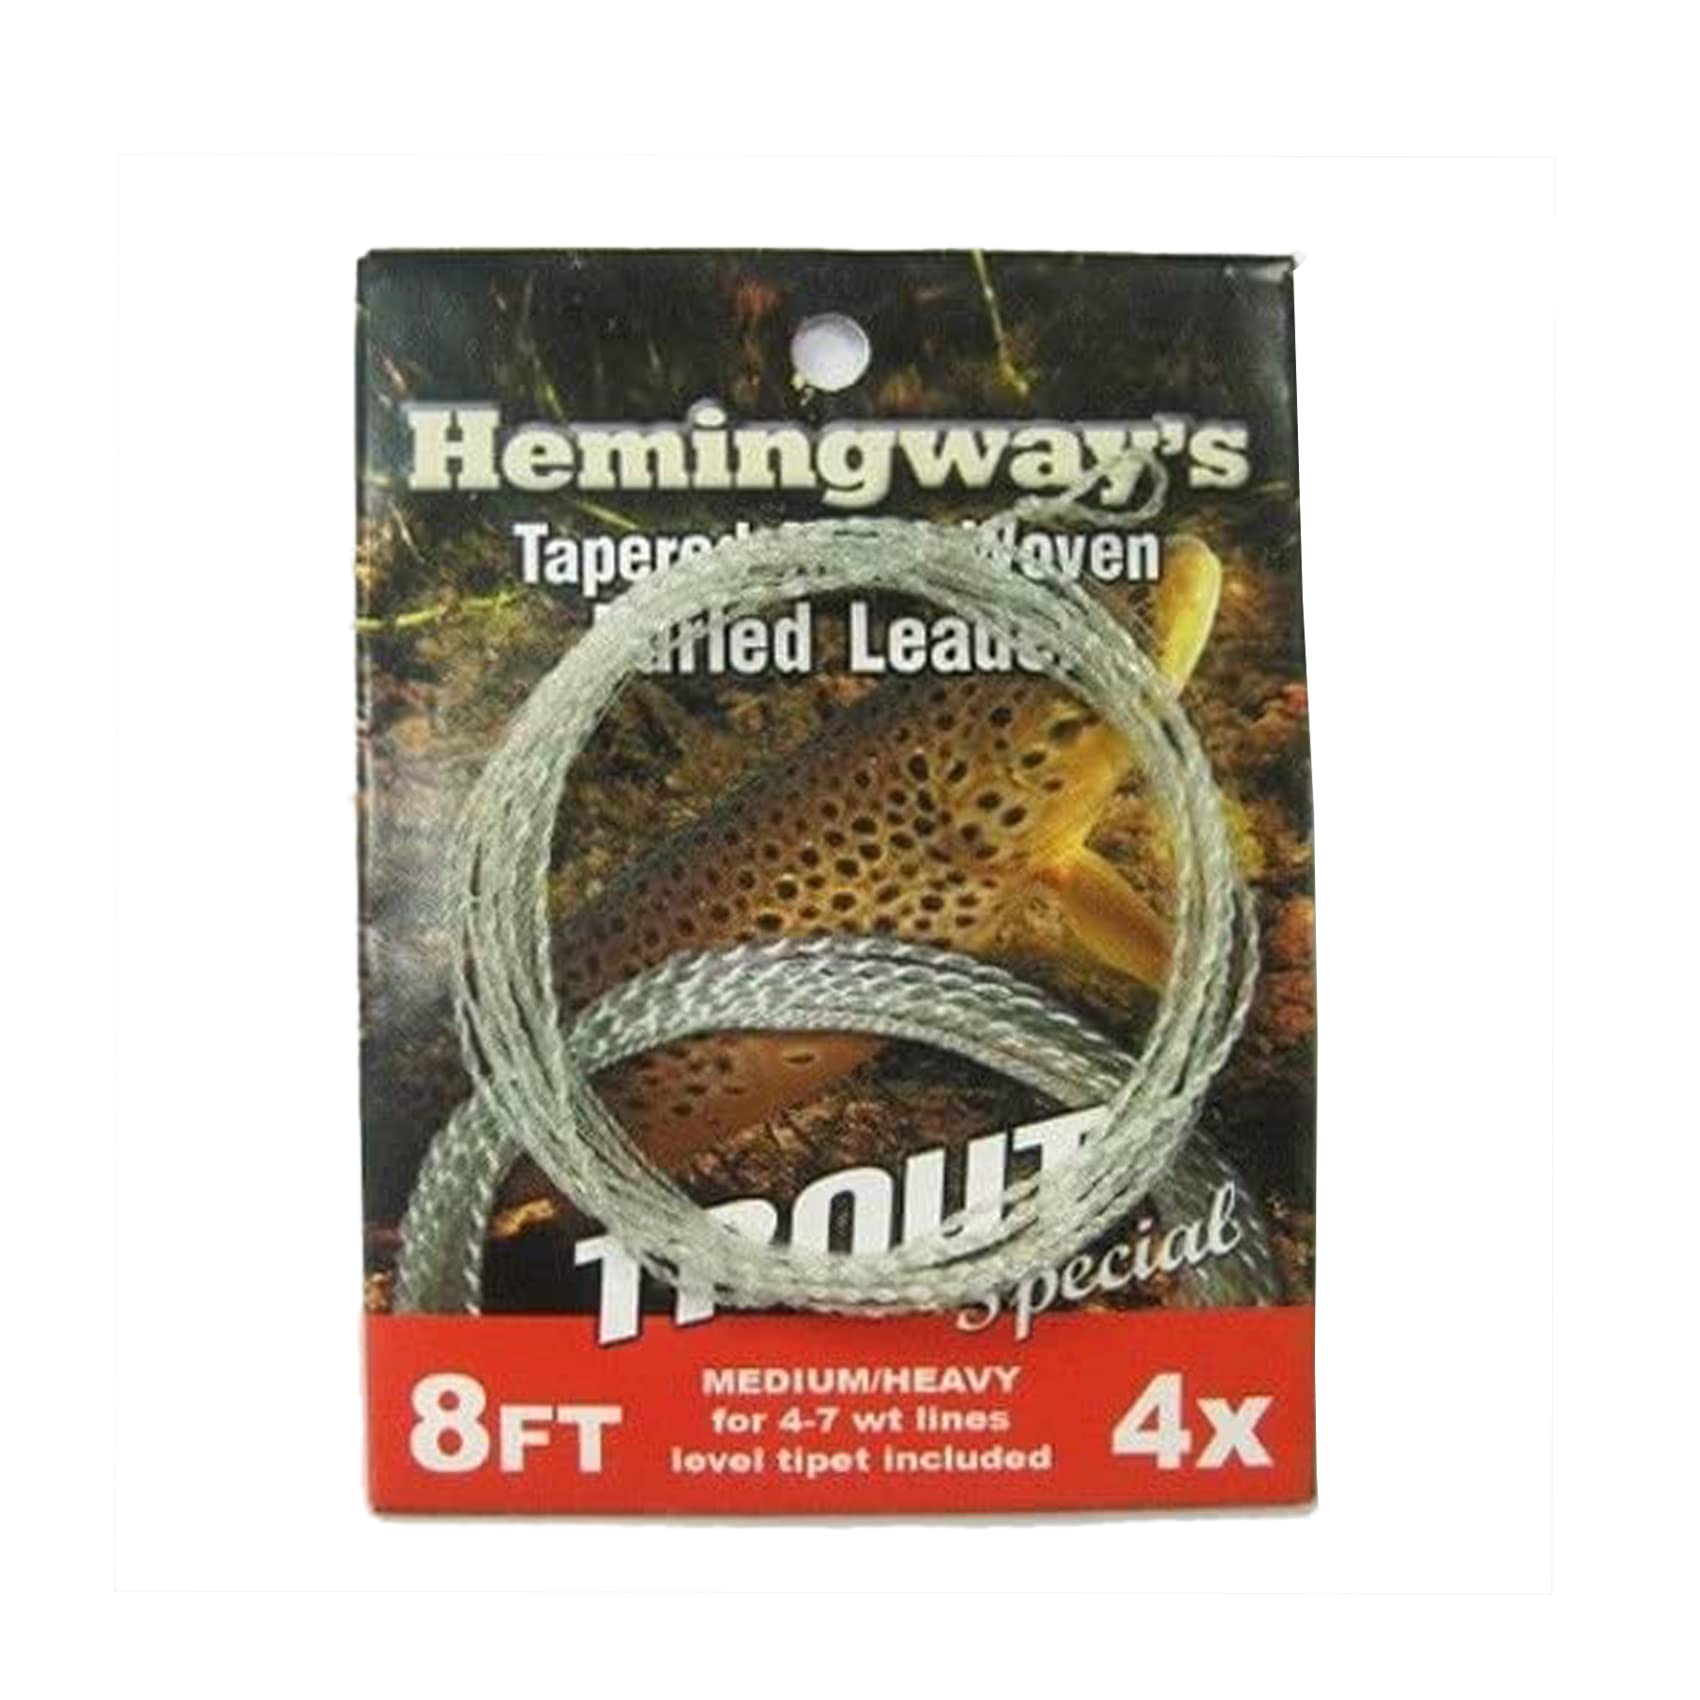 Aventik Hemingways Tapered Leader Hand Woven Furled Leader-Trout Fishing  Leader 8FT,4X